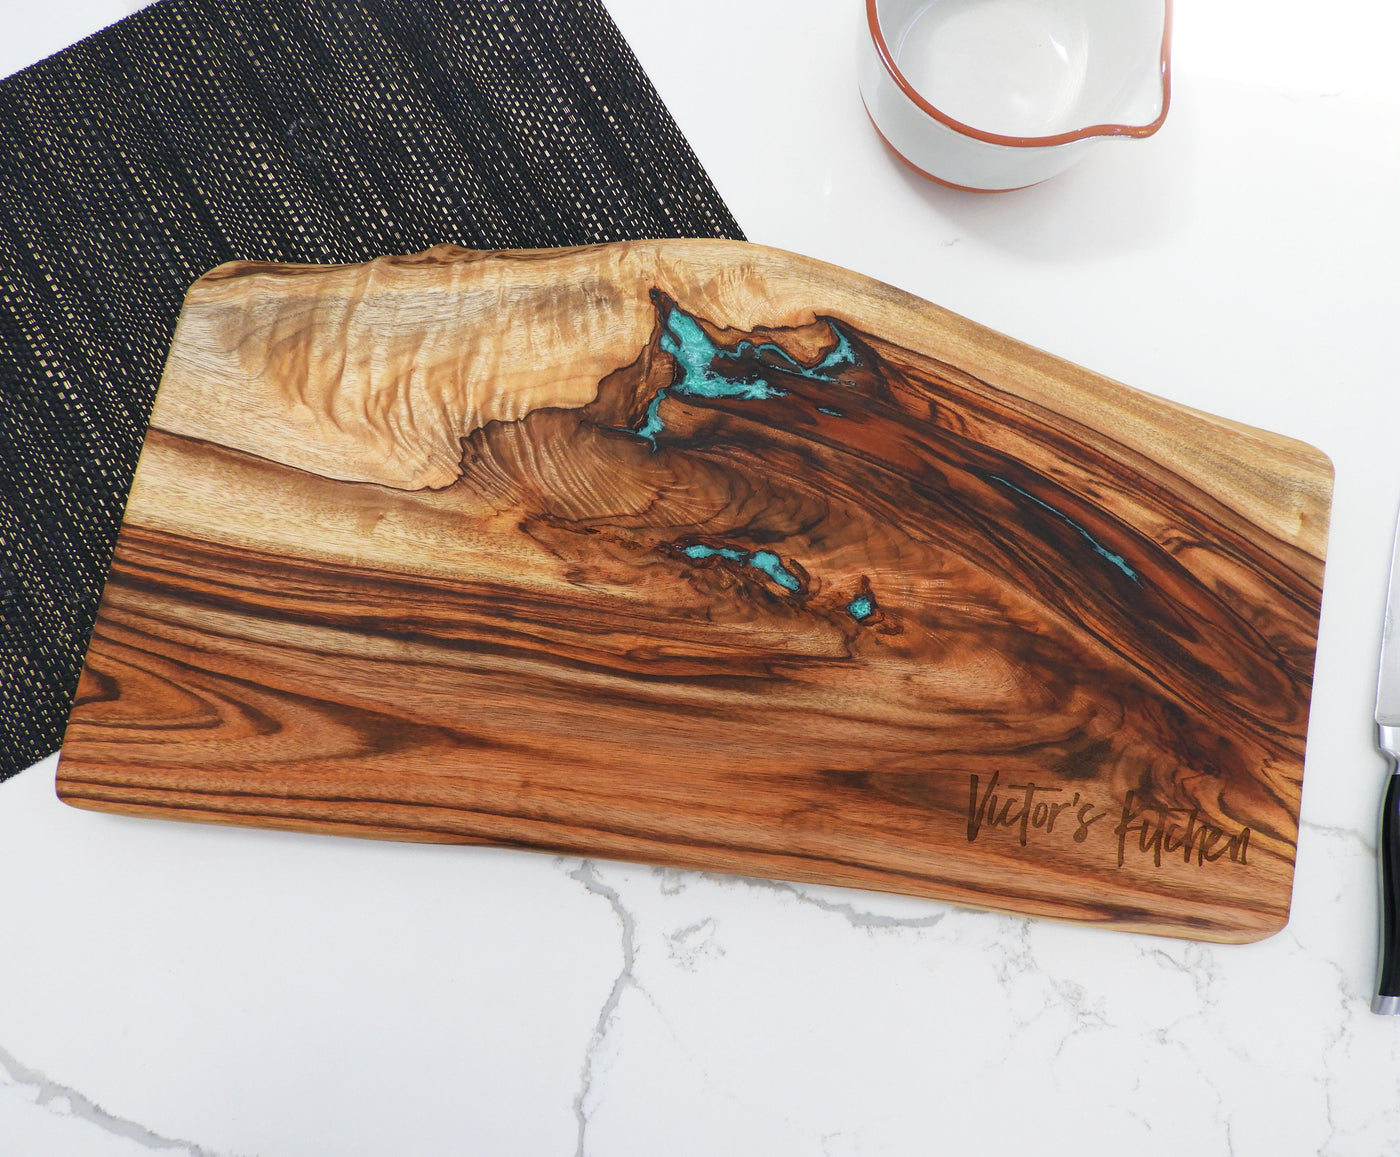 The Natural 550 Resin Feature – Wildfire Engraving